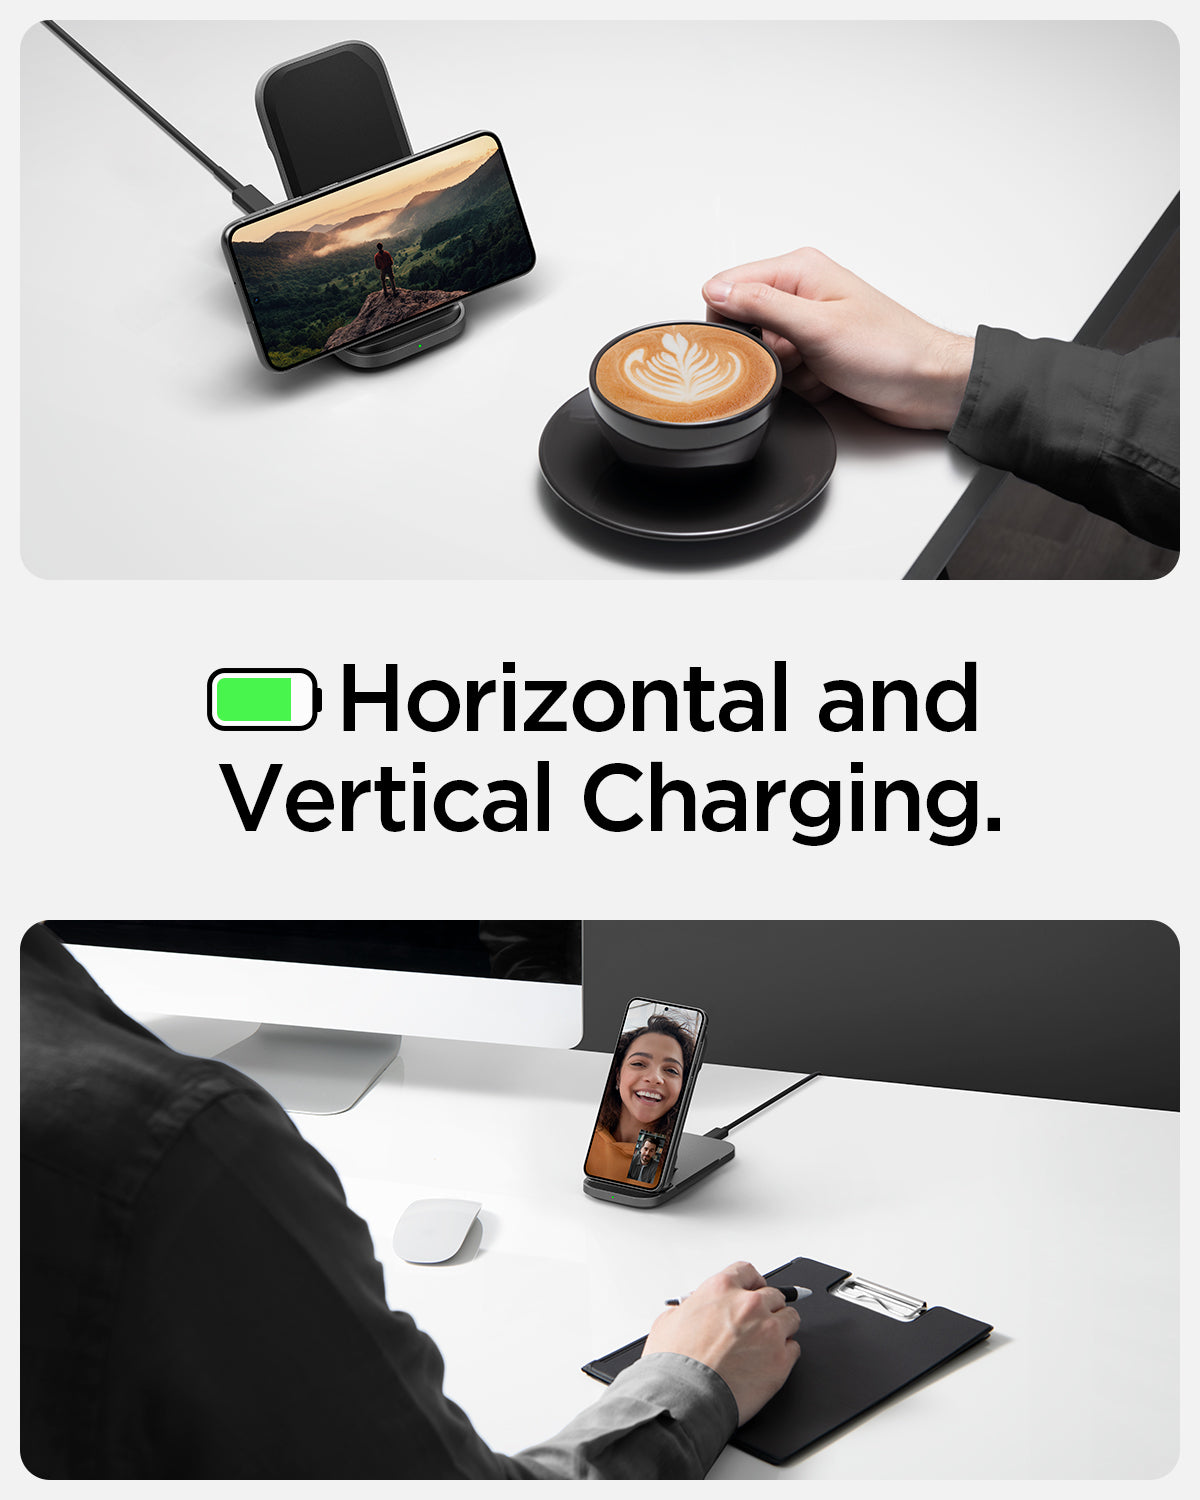 ACH04622 - ArcField™ Flex 15W Wireless Charger PF2201 in Black showing the Horizontal and Vertical Charging. A device in horizontal charged on wireless charger while drinking coffee and other one in vertical while meeting with facetime